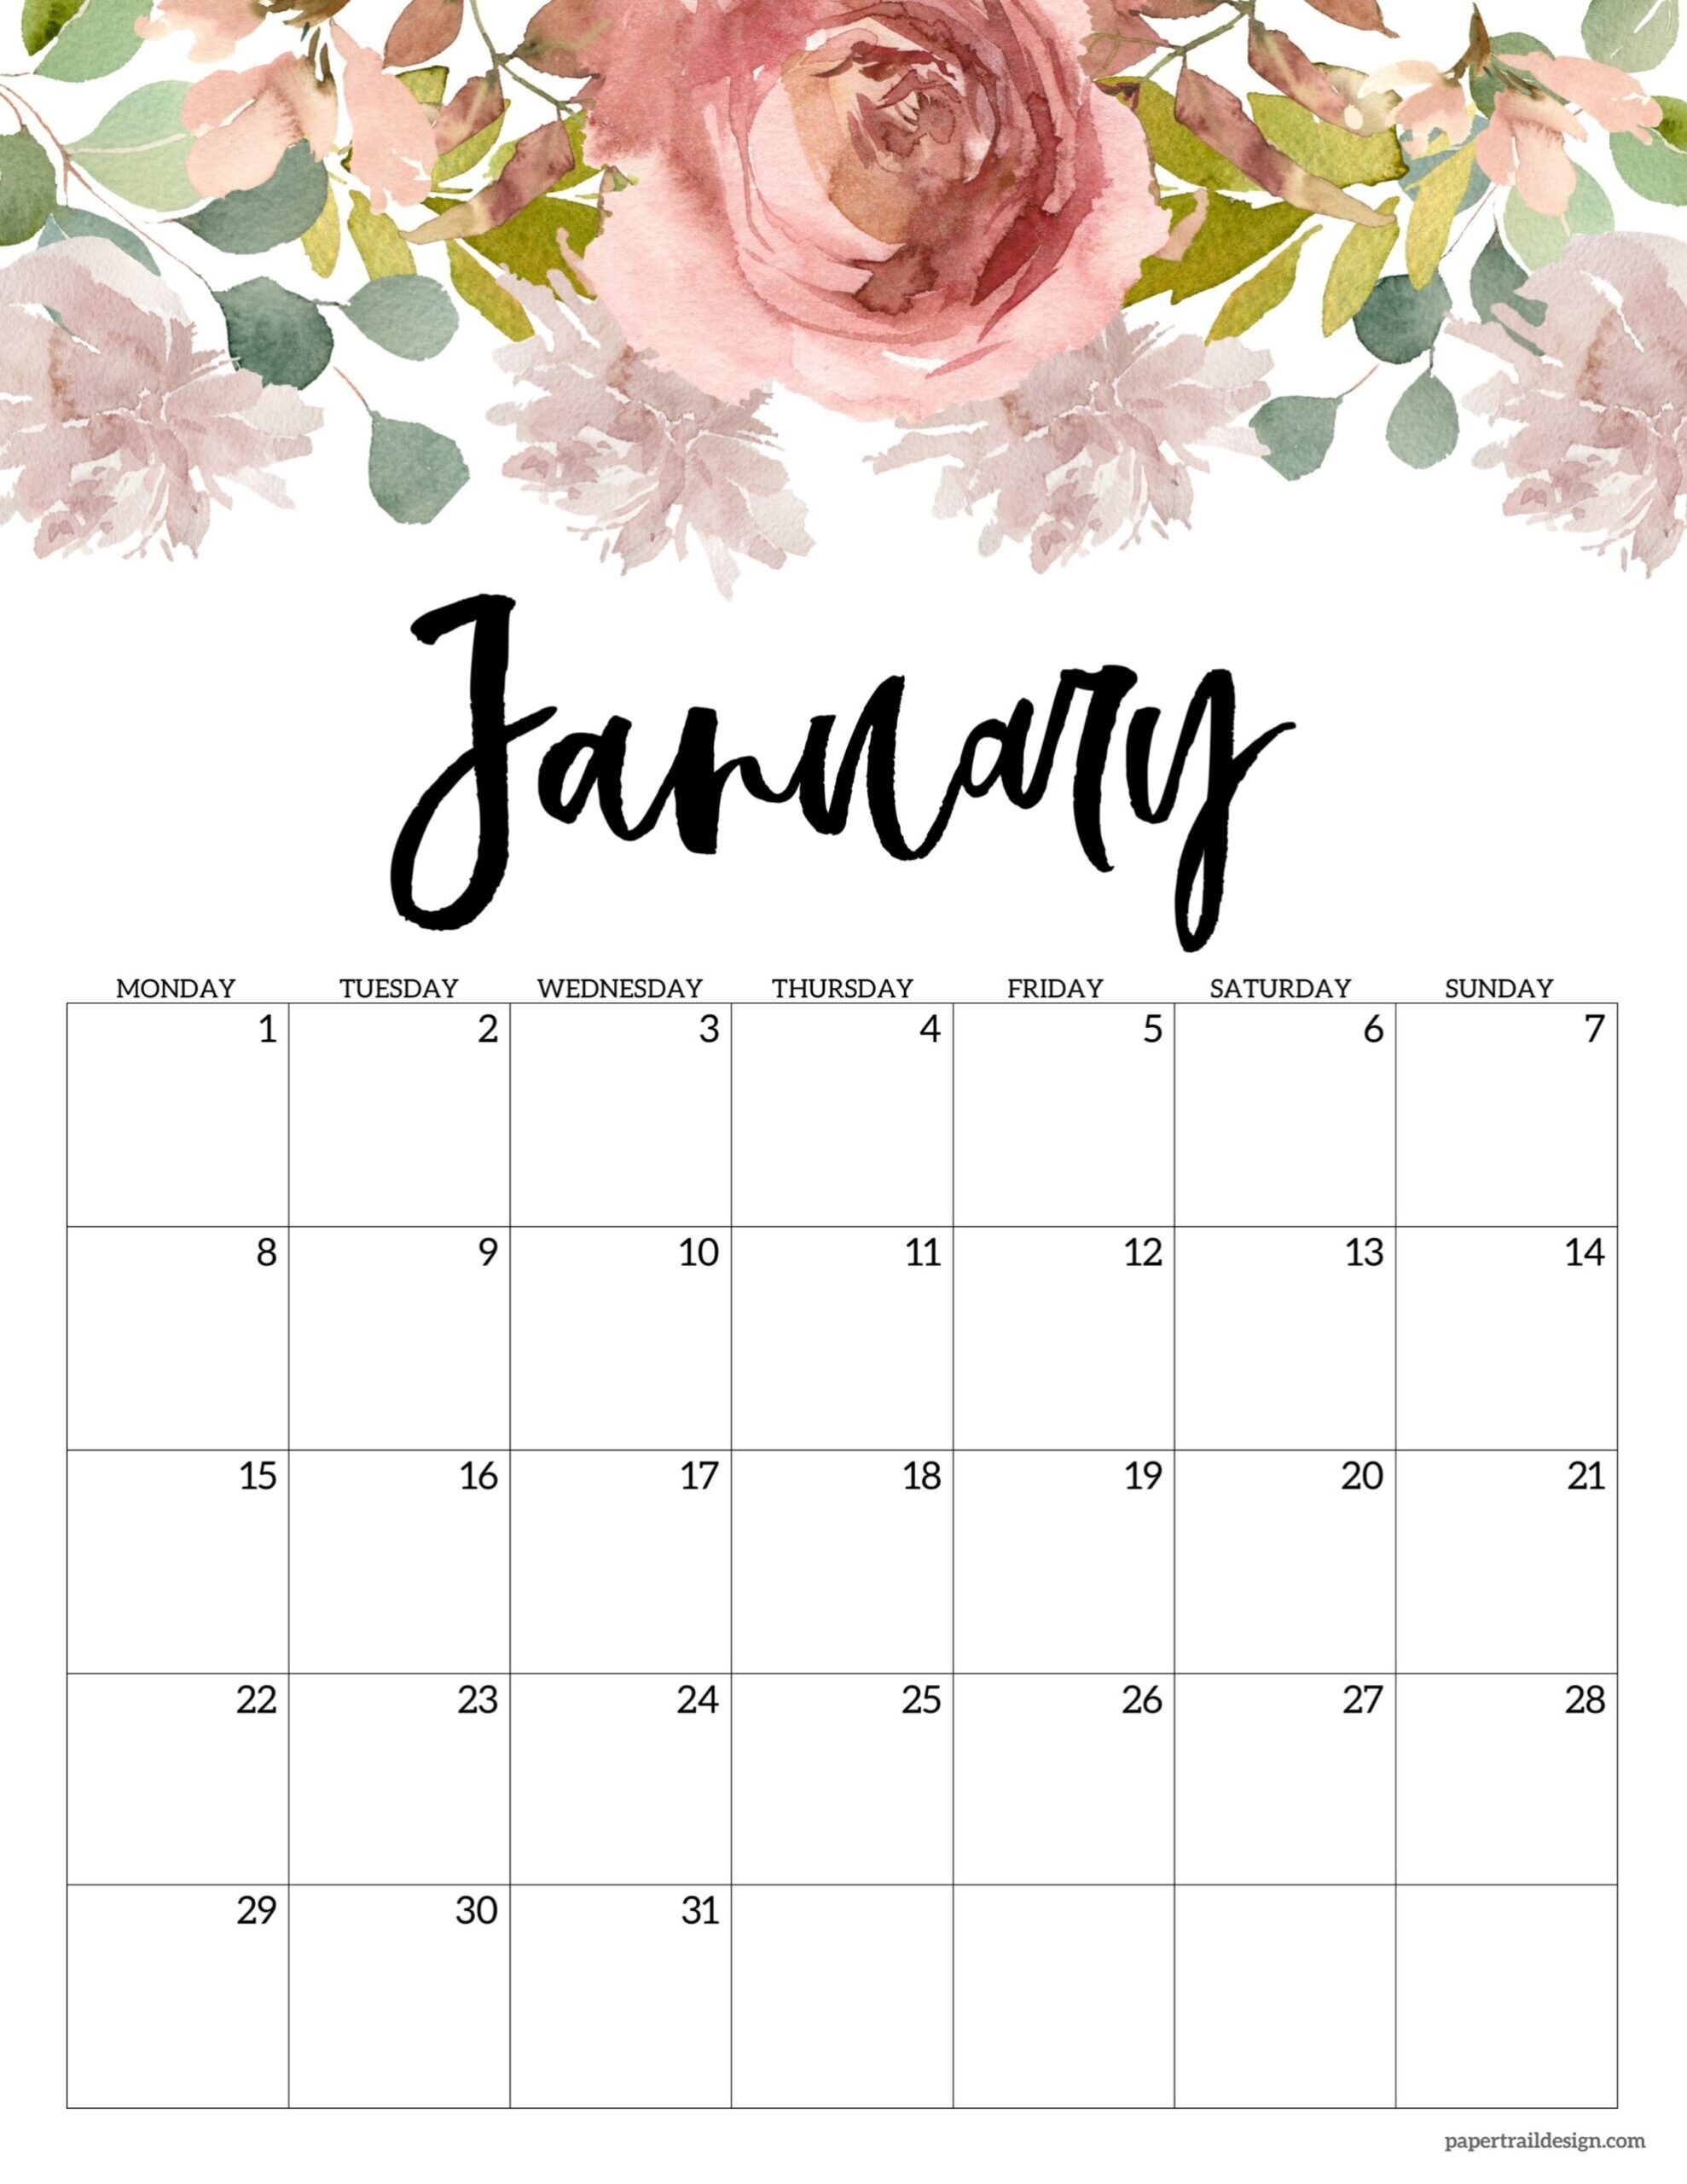 Free Printable 2024 Floral Calendar – Monday Start - Paper Trail with regard to Free Printable Calendar 2024 Starting With Monday